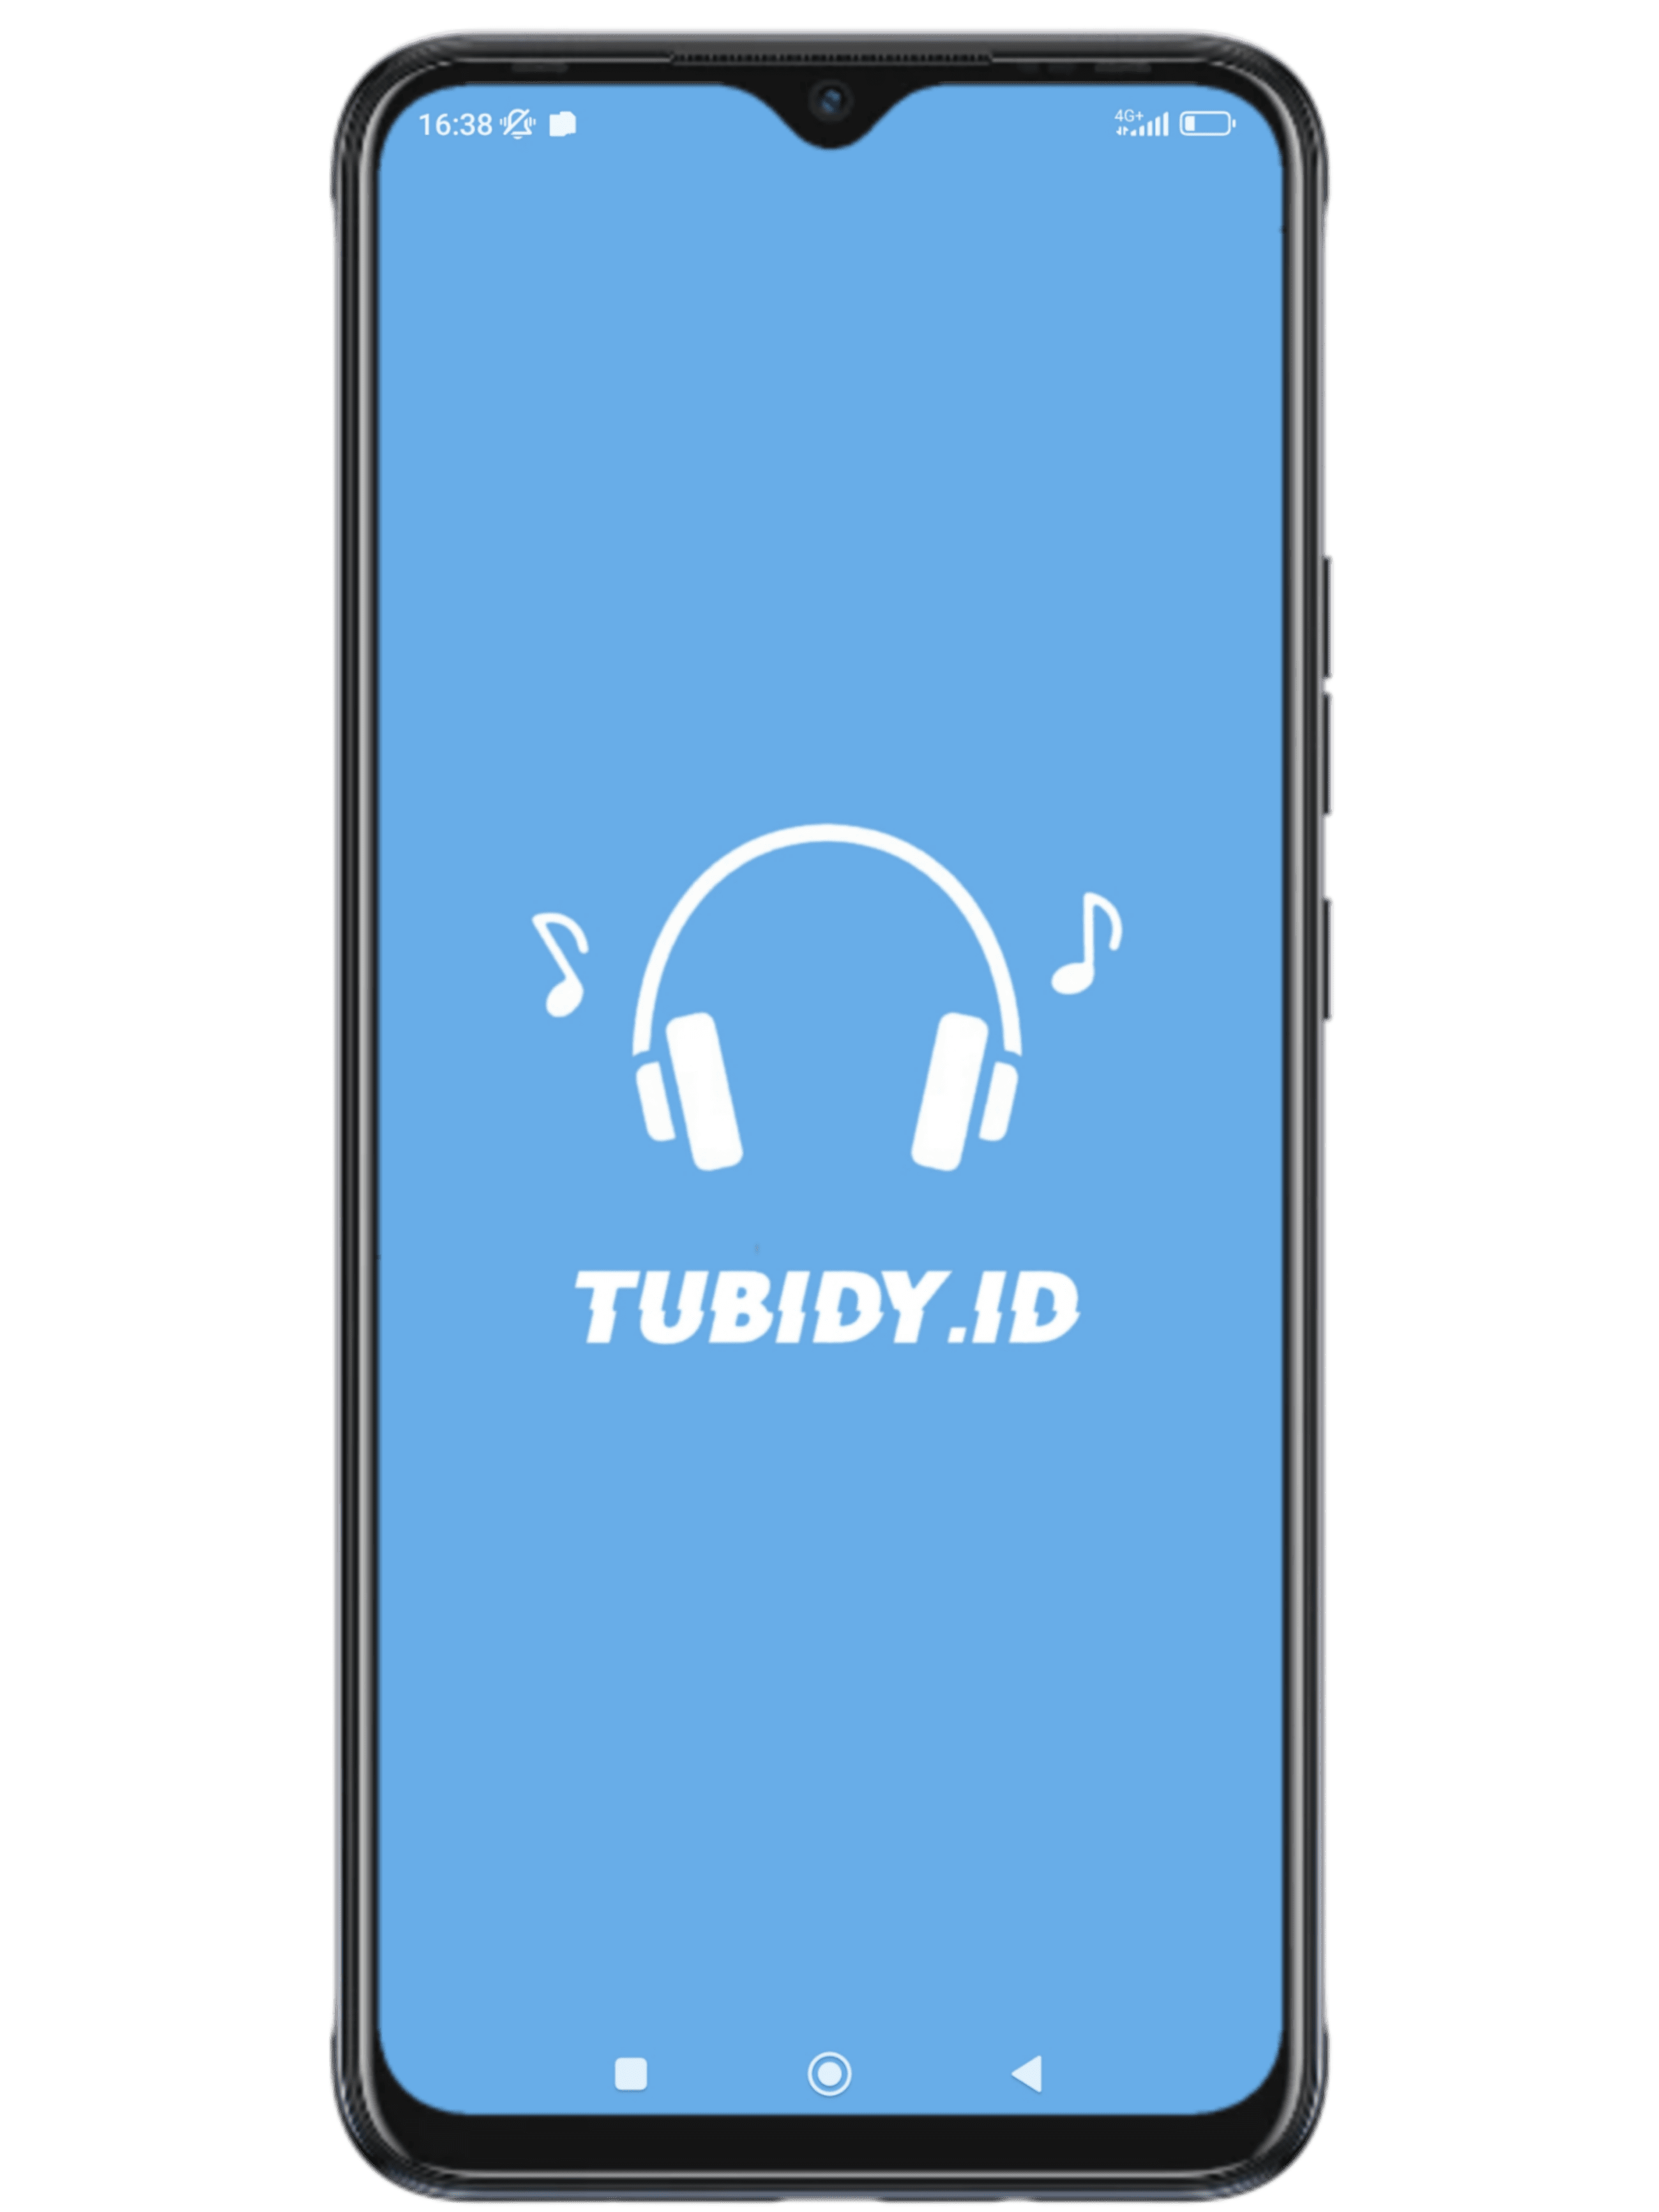 ananth gopal recommends tubidy search engine music pic